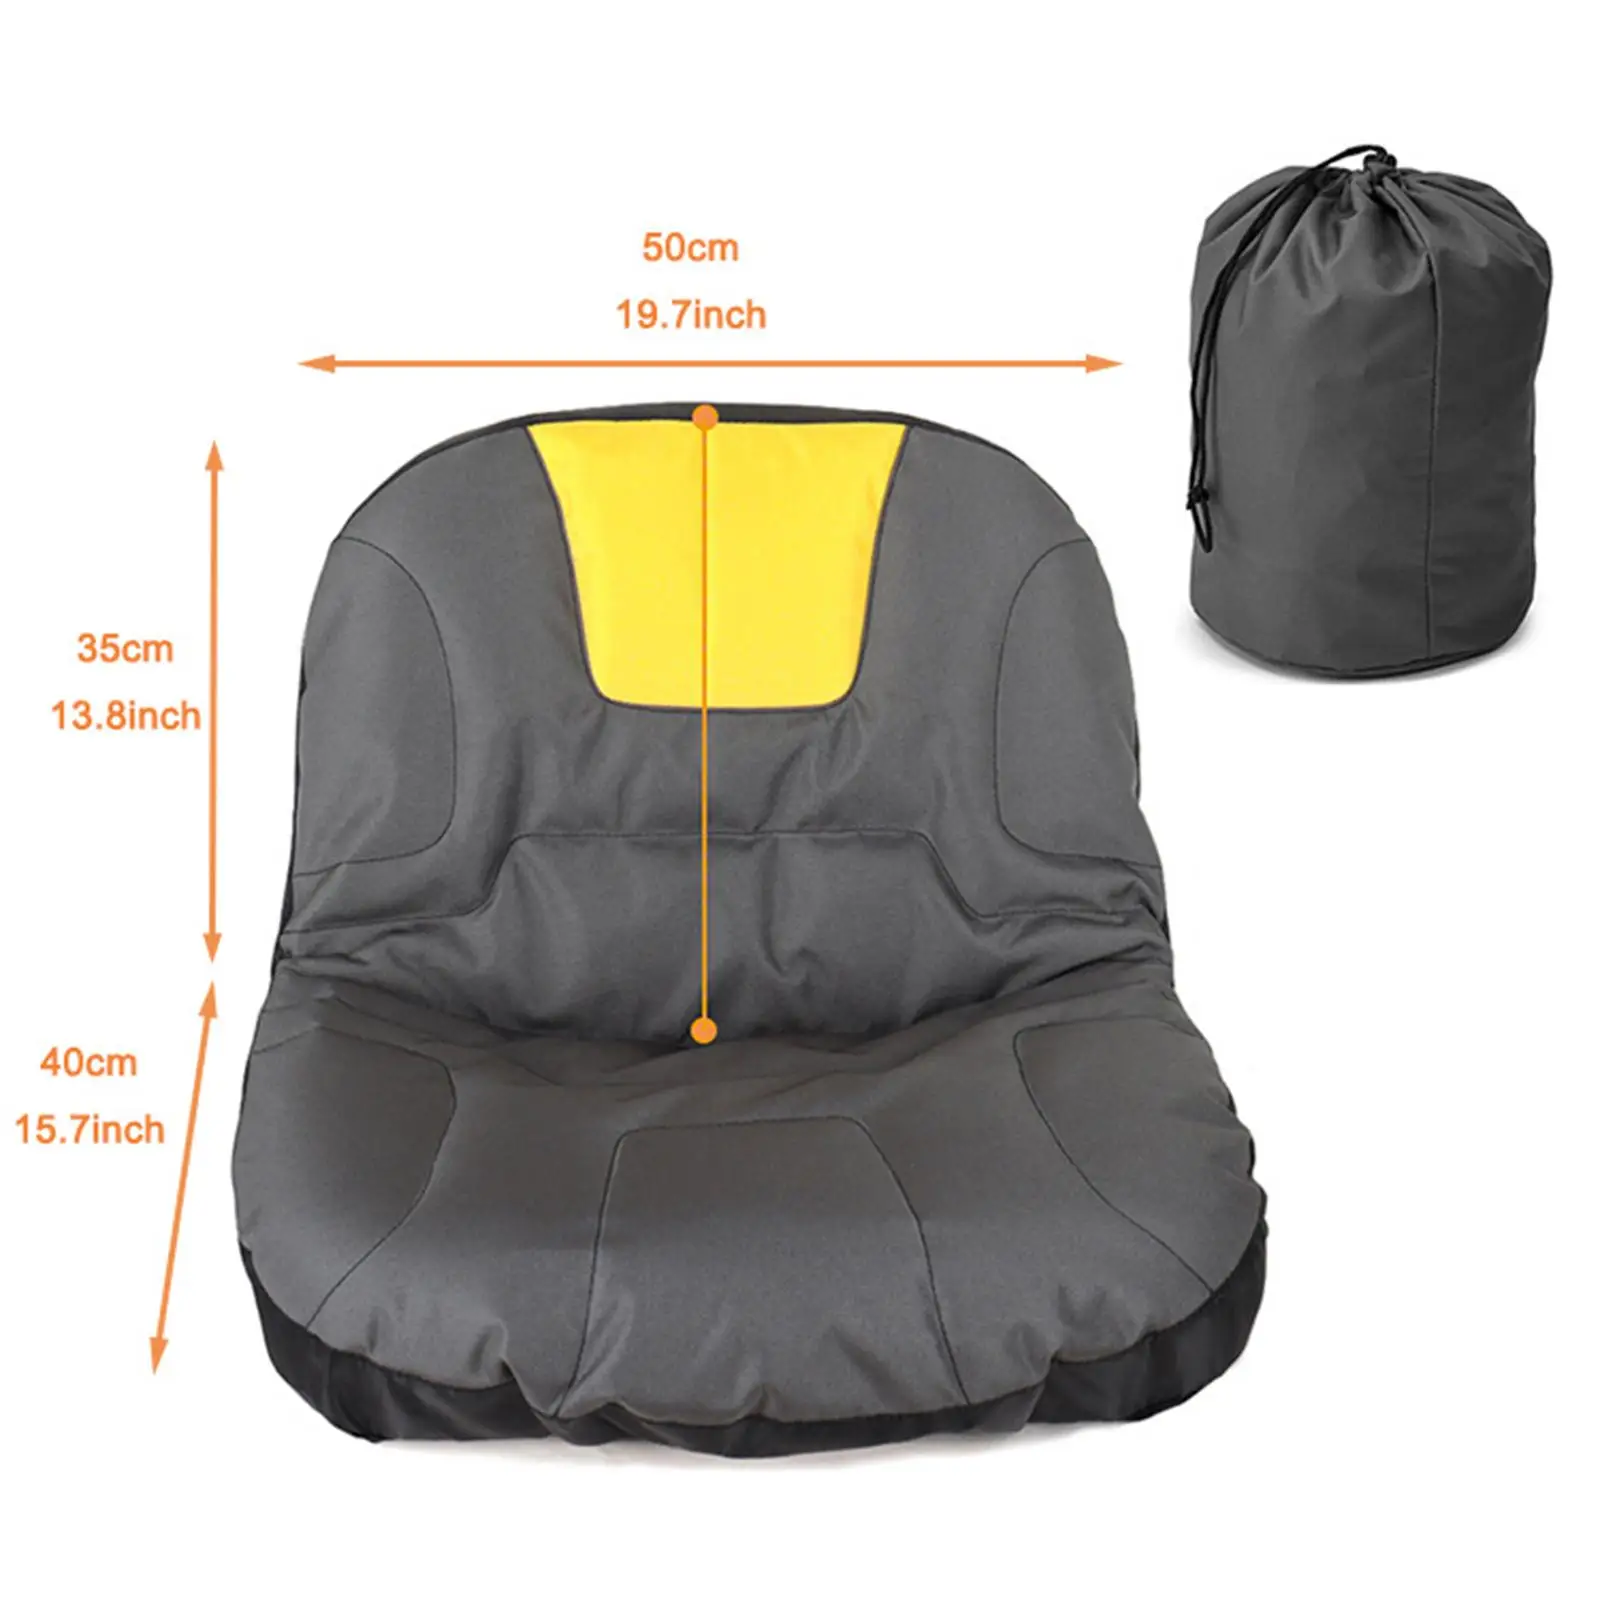 Lawn Mower Seat cover Oxford Cloth Non Slip Anti Scratch Portable Durable Mower Cushion Seat Cover for Forklifts Fittings